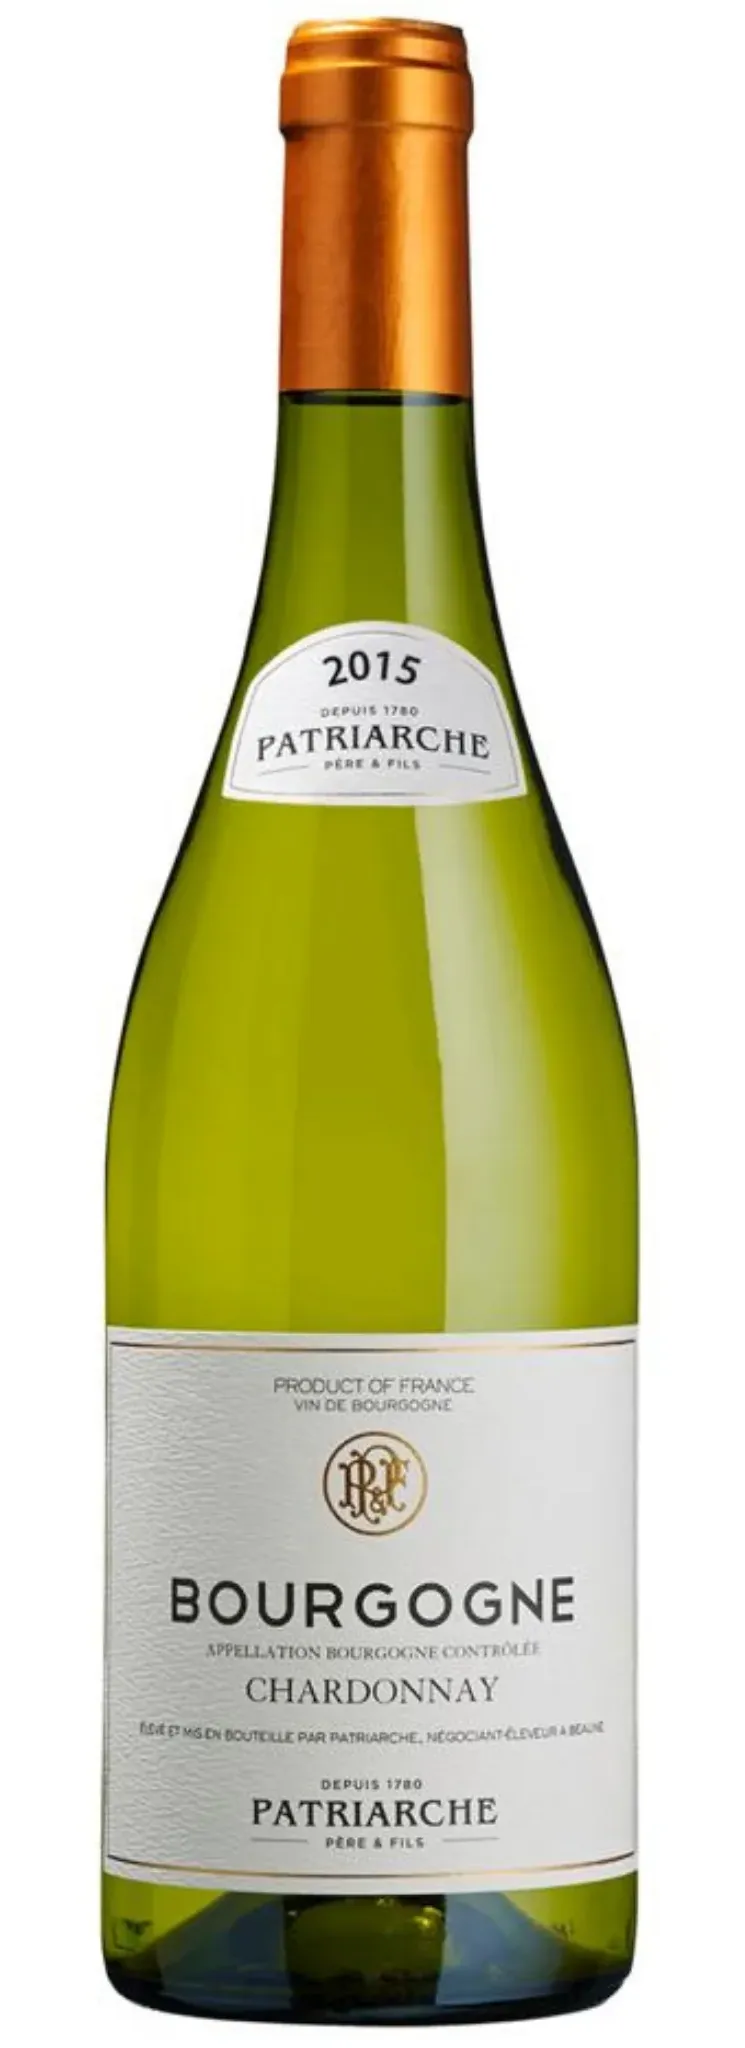 Bottle of Patriarche Père & Fils Chardonnay from search results